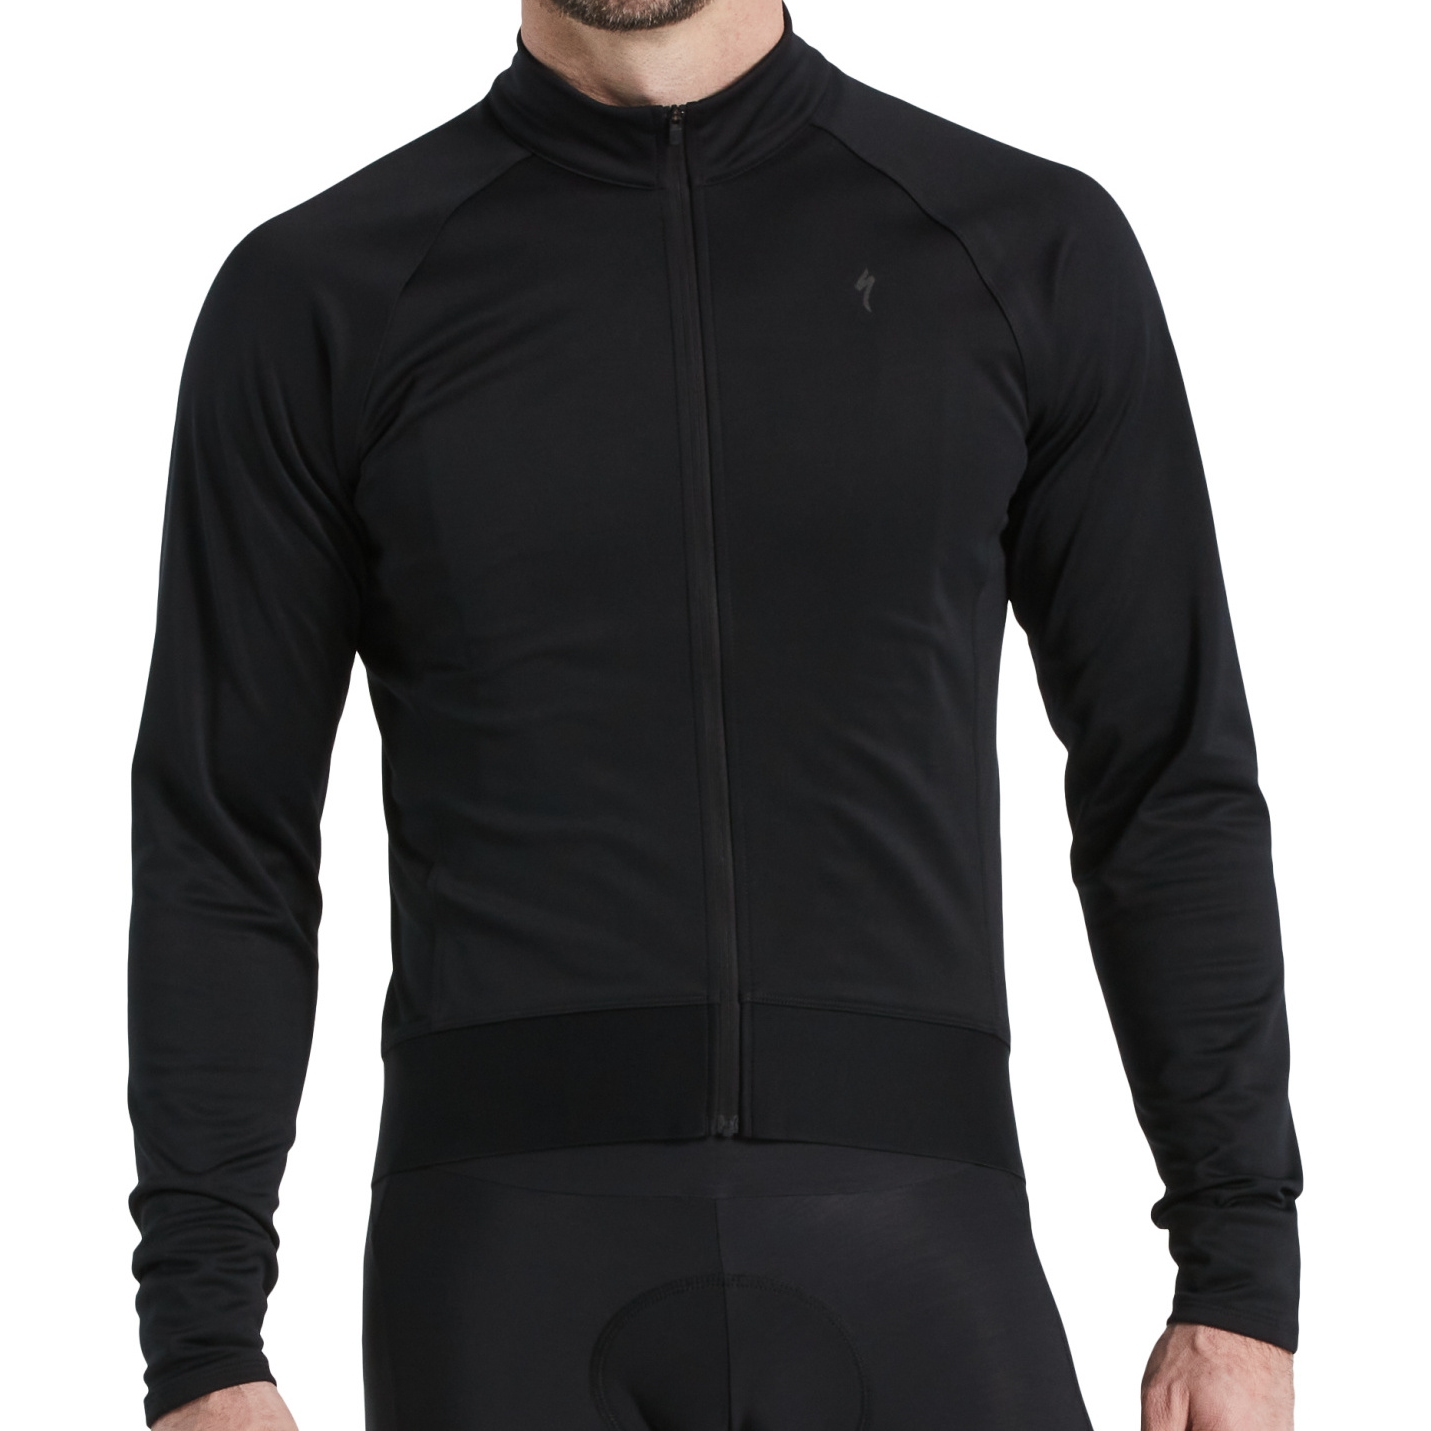 Specialized RBX Expert Thermal Long Sleeve Jersey Men - black